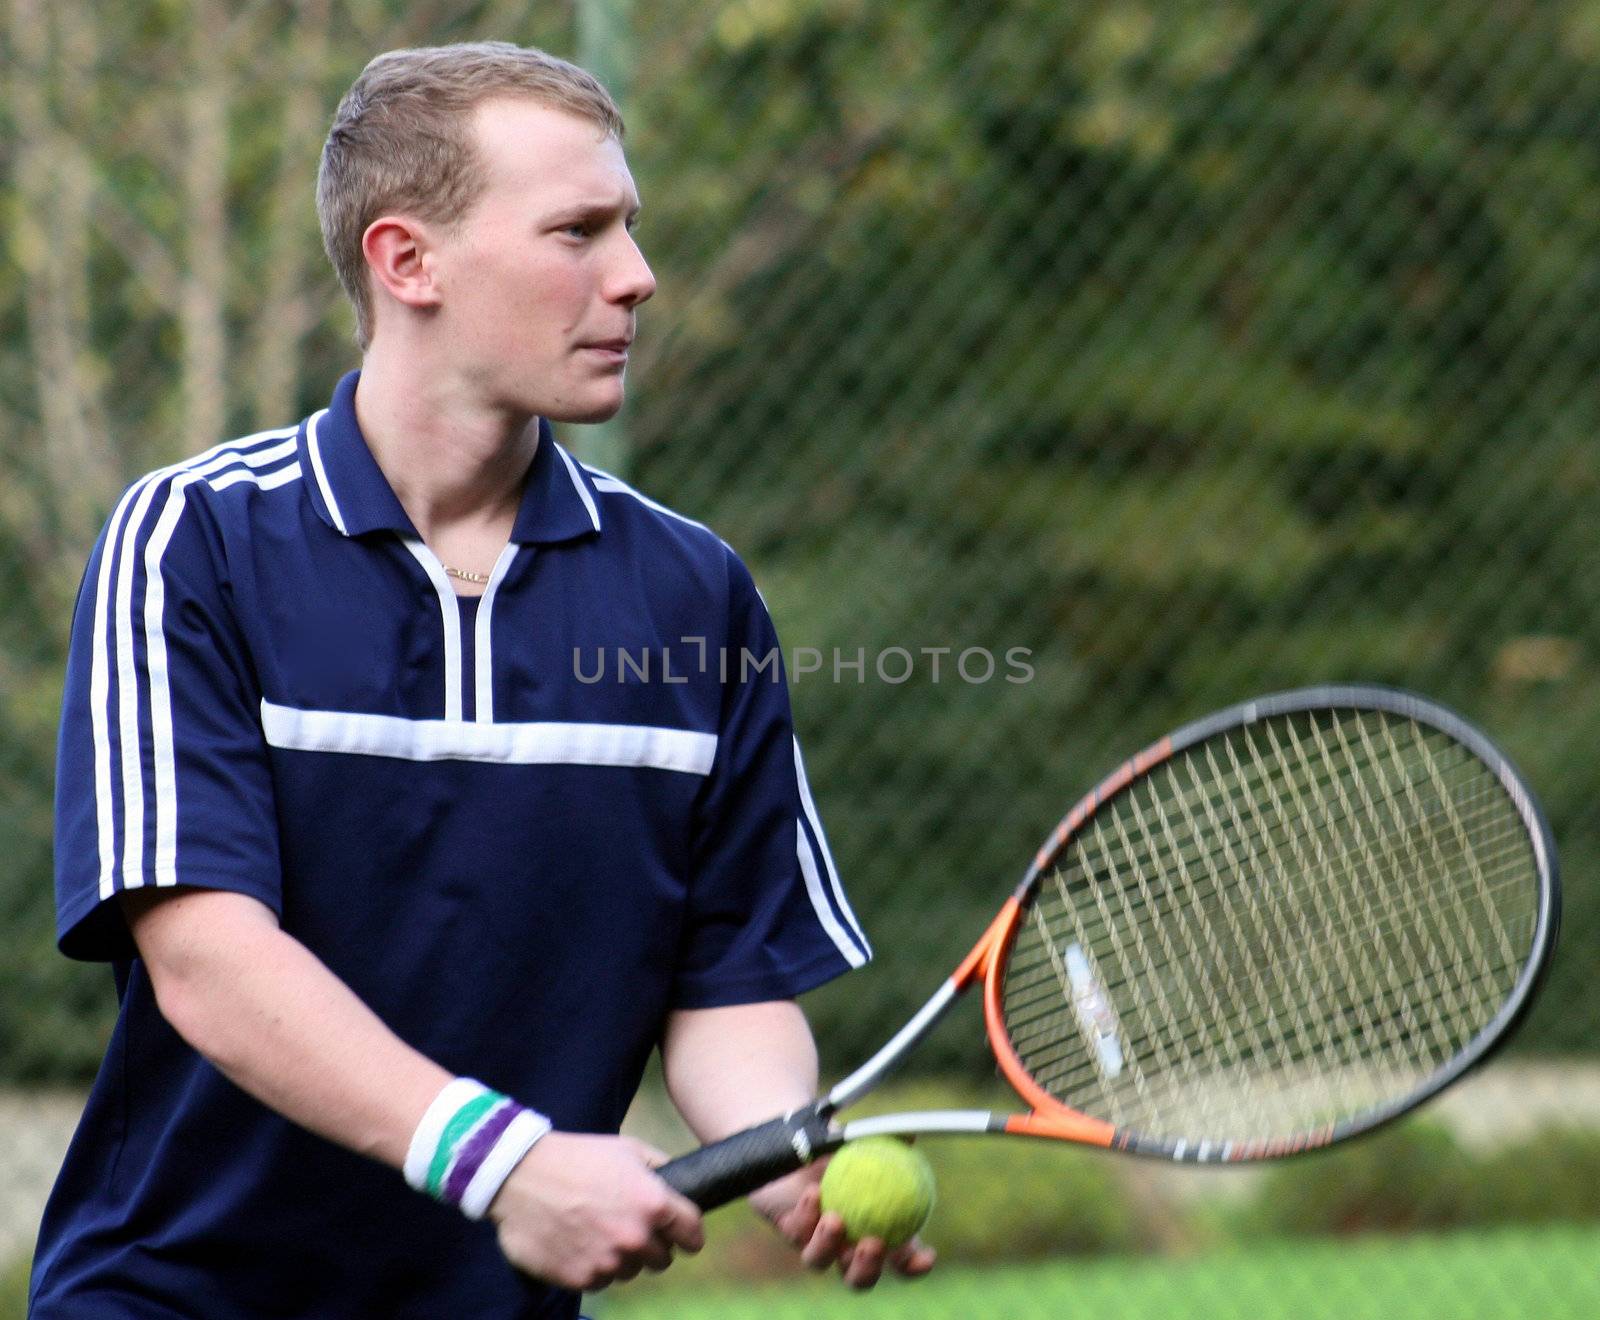 James ready to serve his game of tennis.